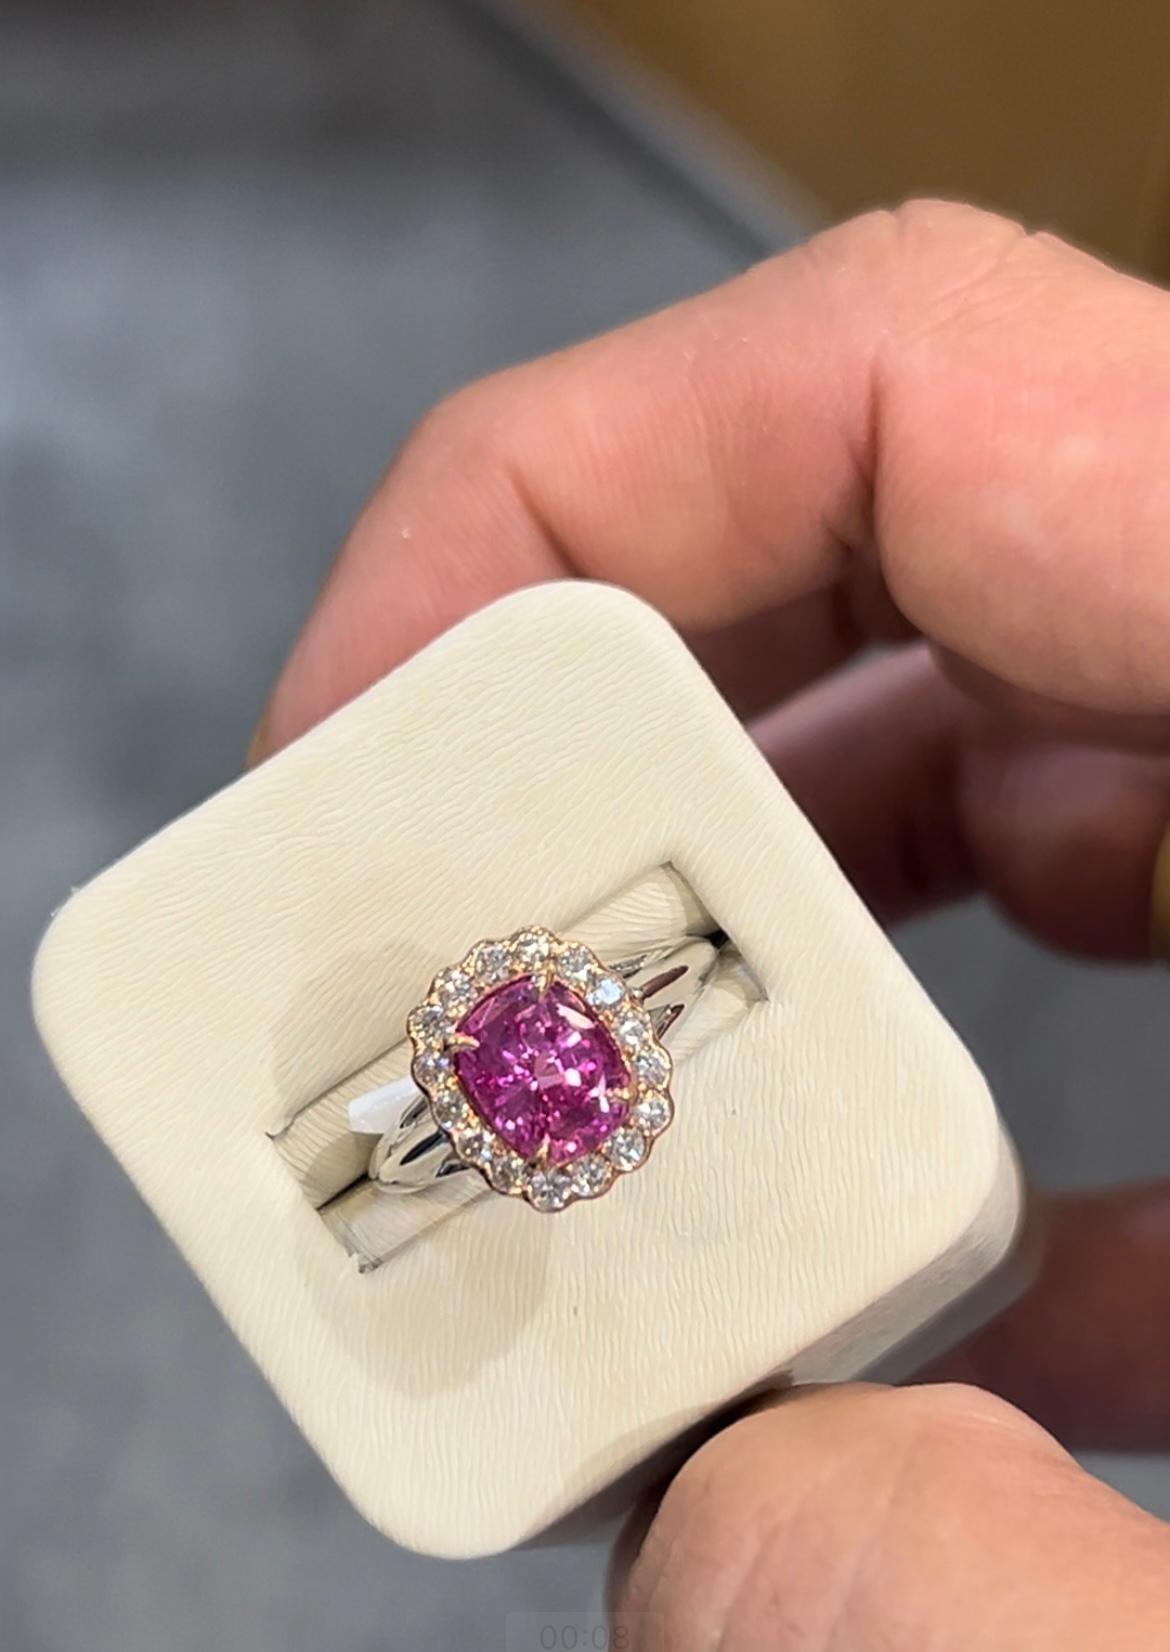 Modern 2.64ct cushion-cut intense Pink Sapphire ring. GIA certified. For Sale